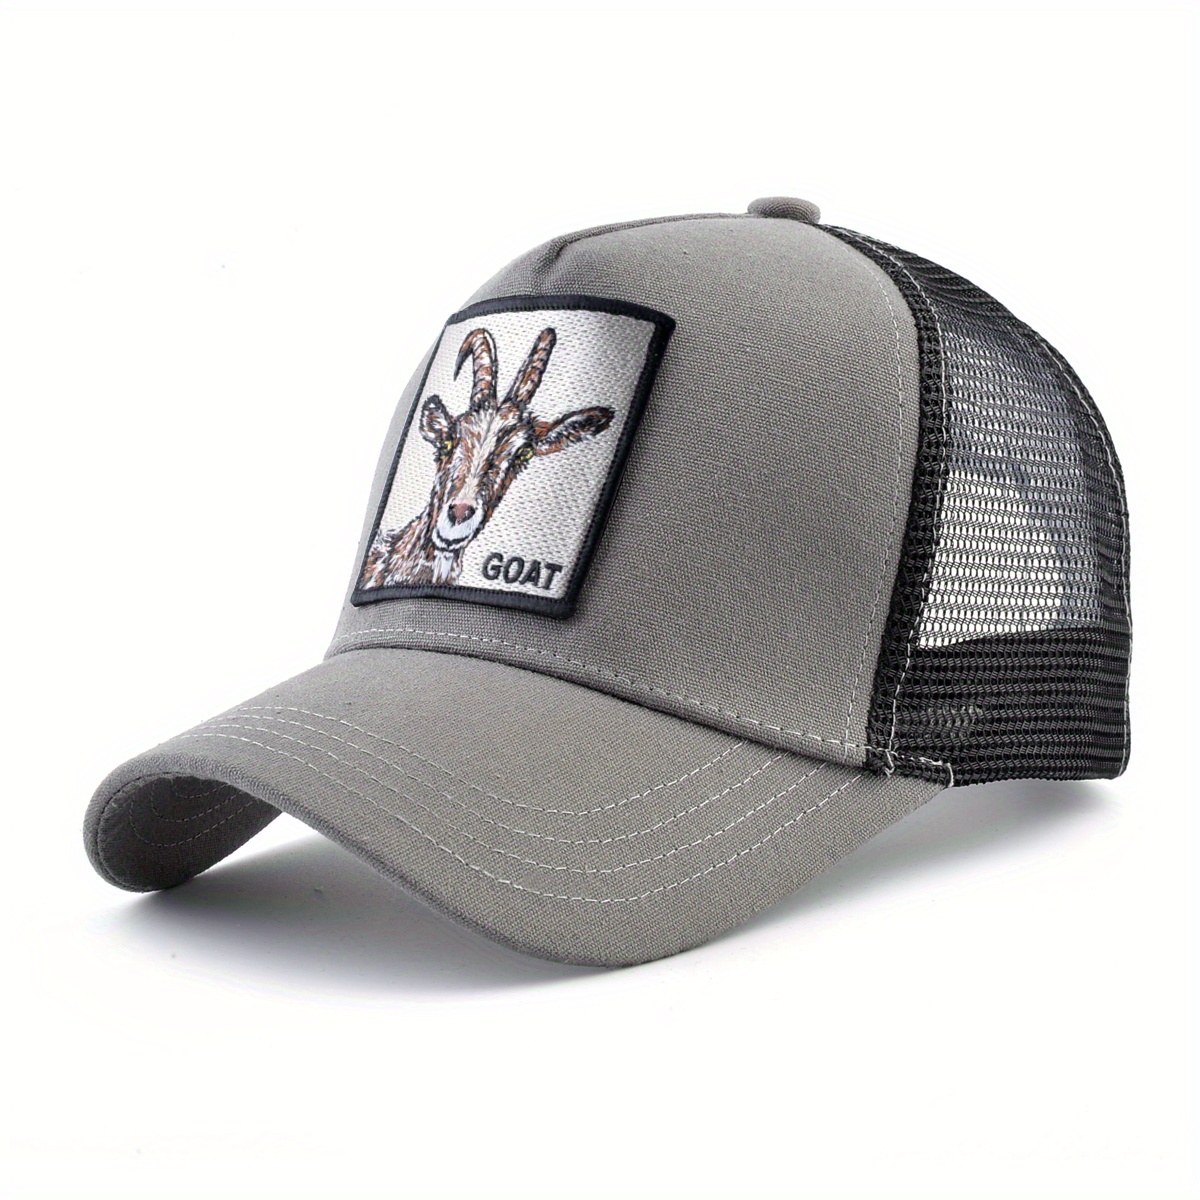 Sports cap for Men and Women Black-Grey